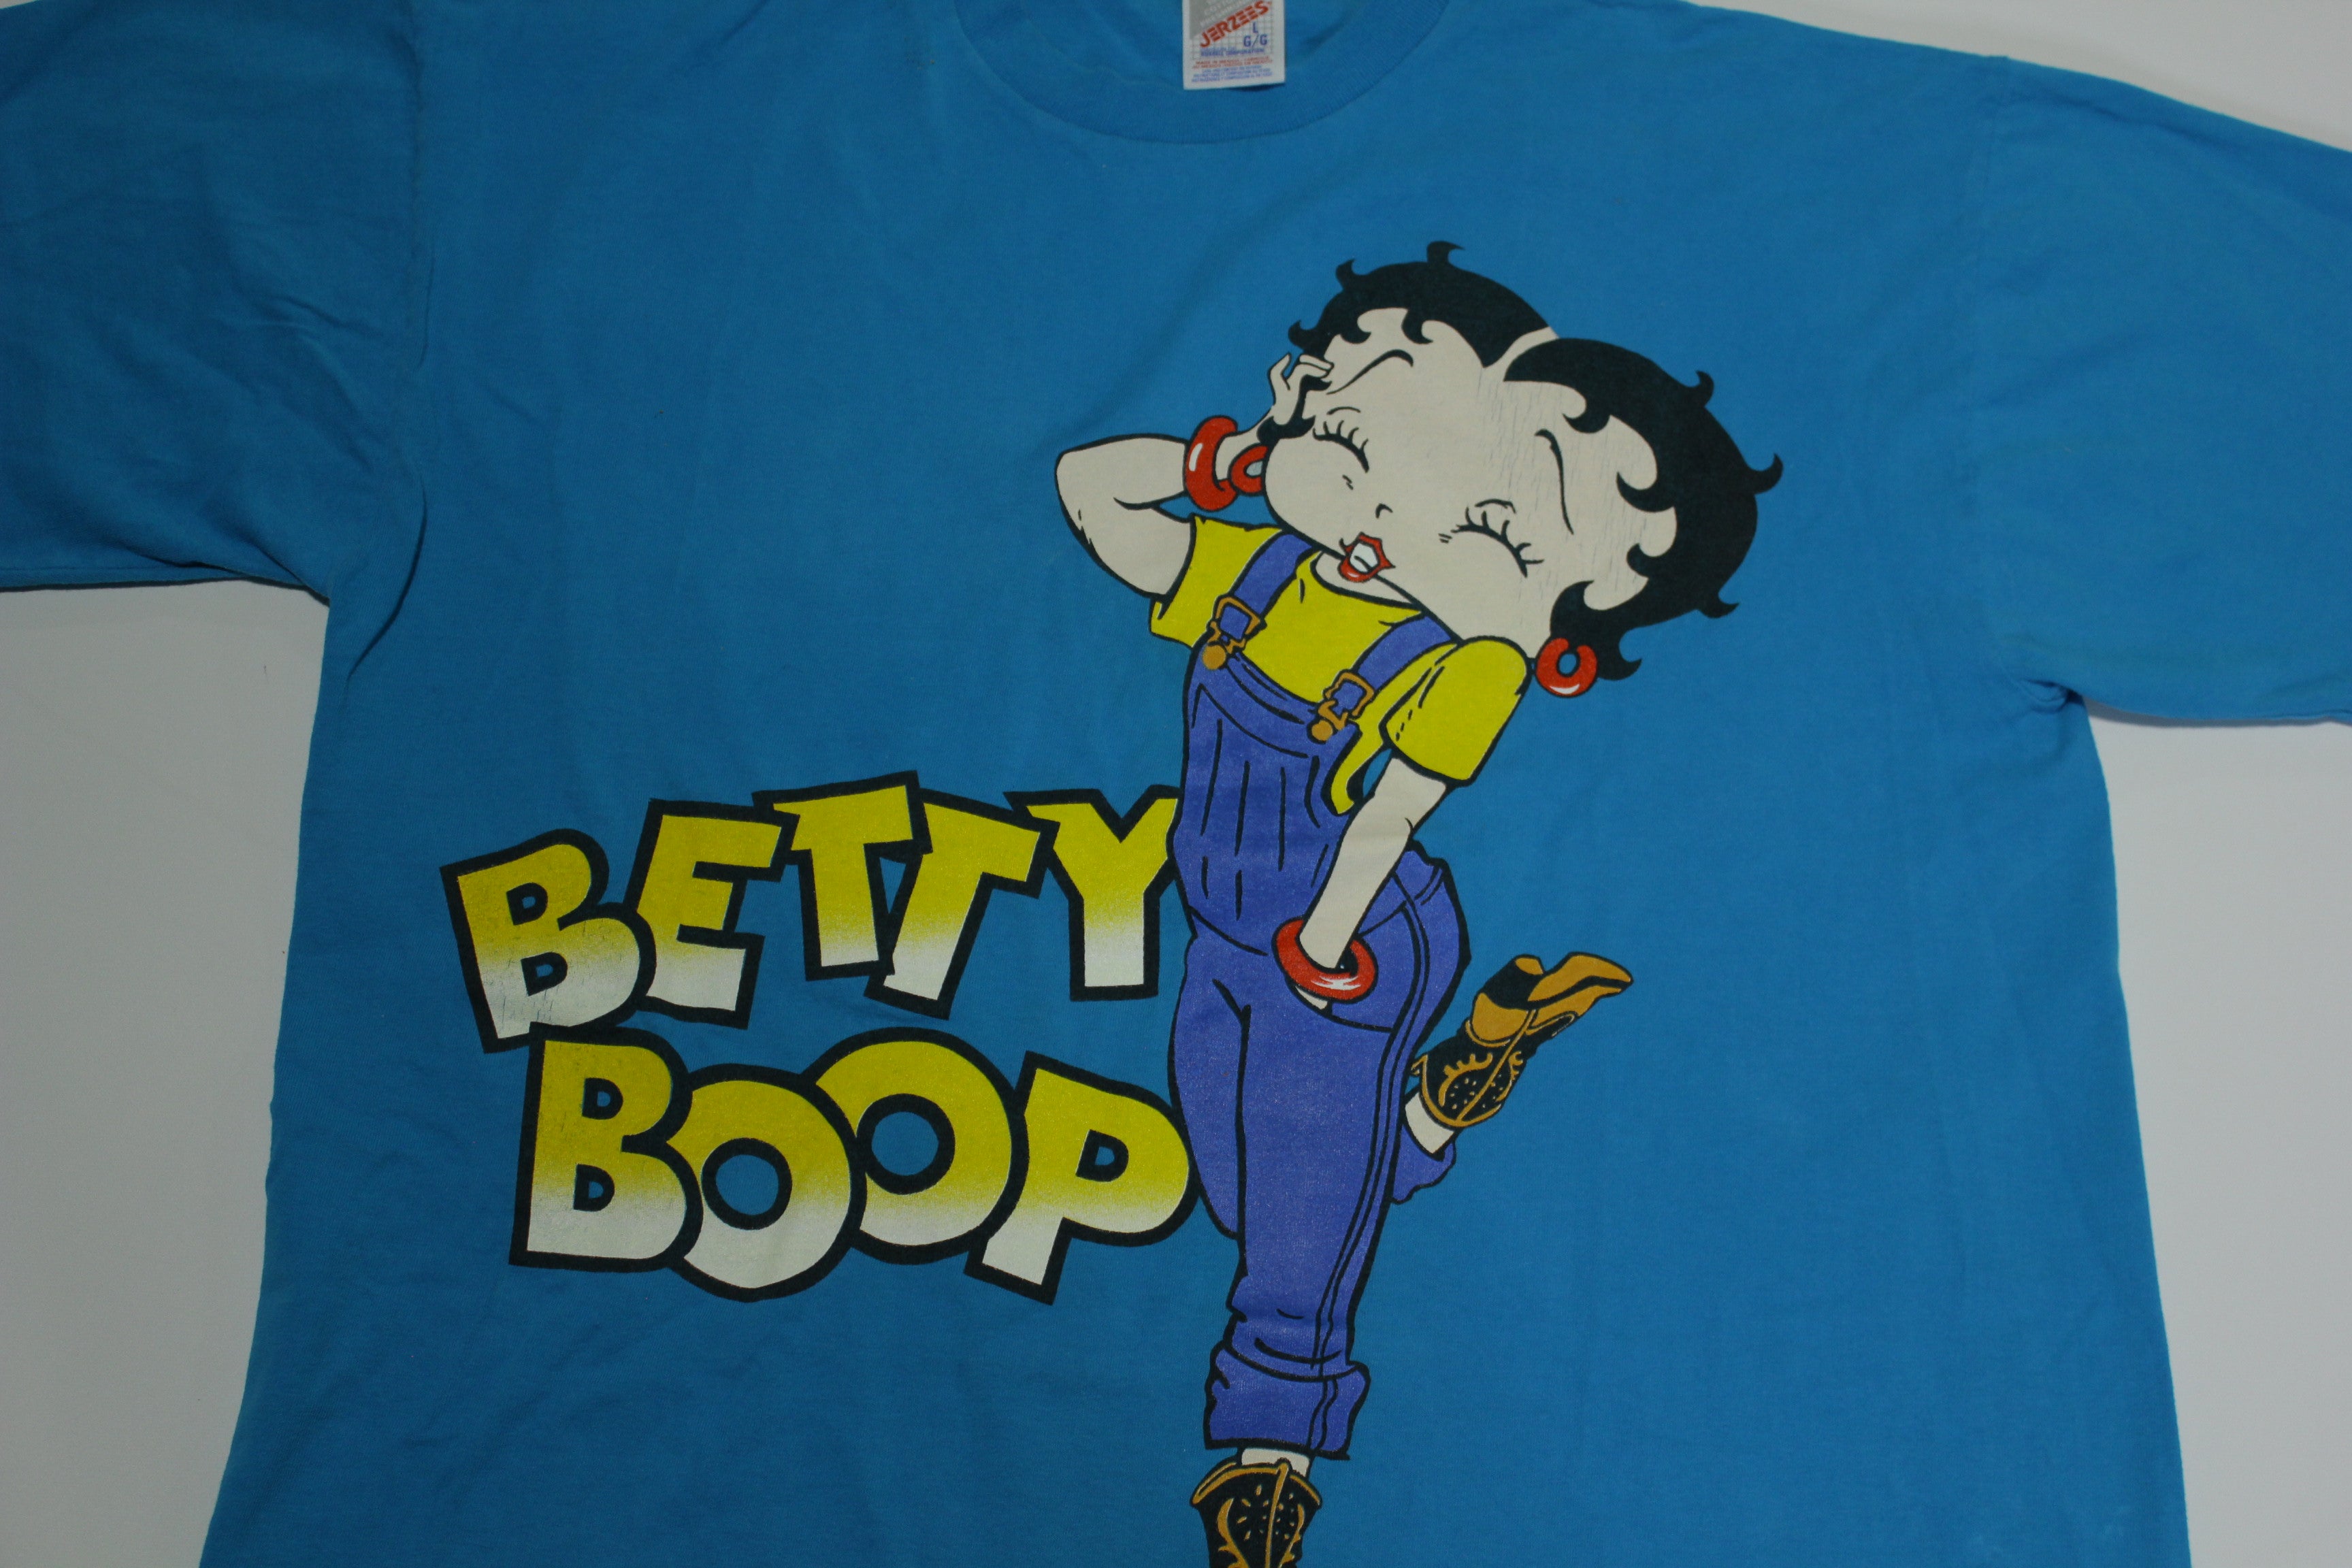 Betty Boop Overalls & Cowboy Boots 1996 Vintage 90s King Features